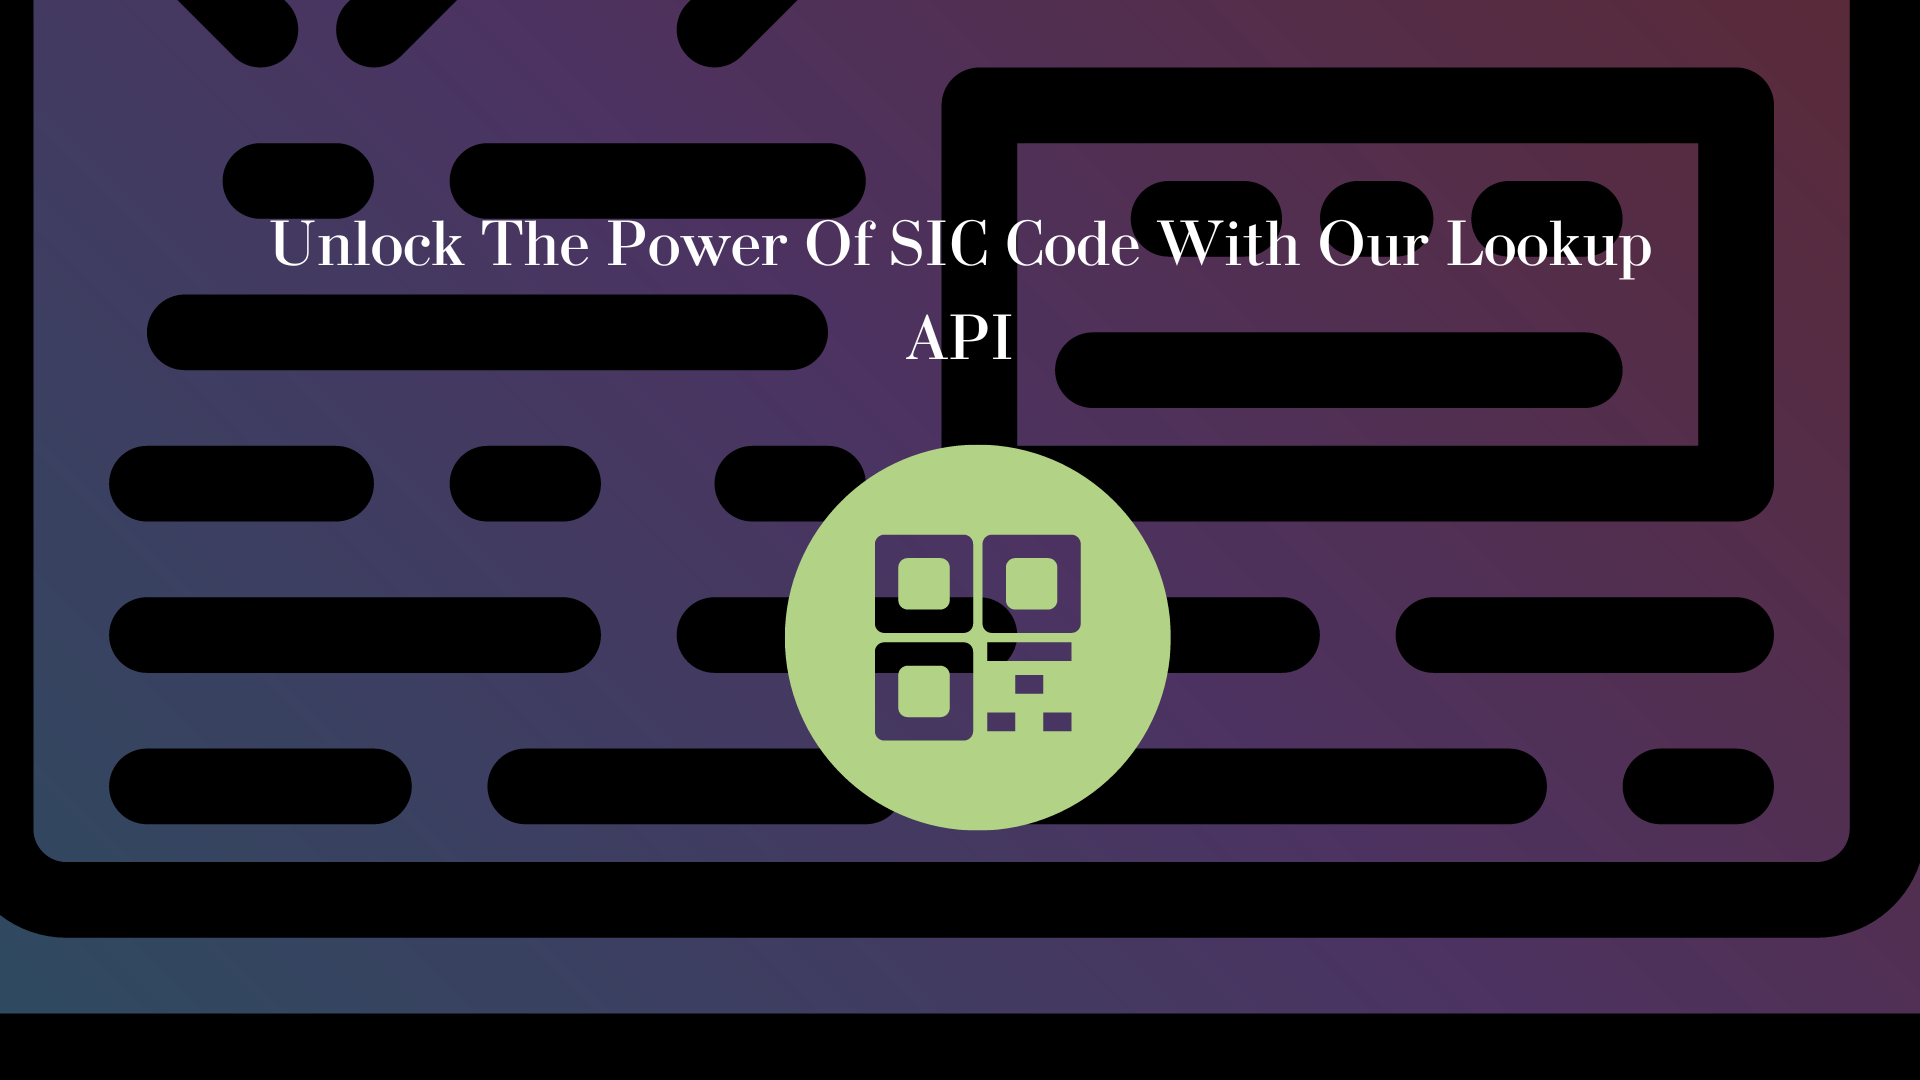 Unlock The Power Of SIC Code With Our Lookup API